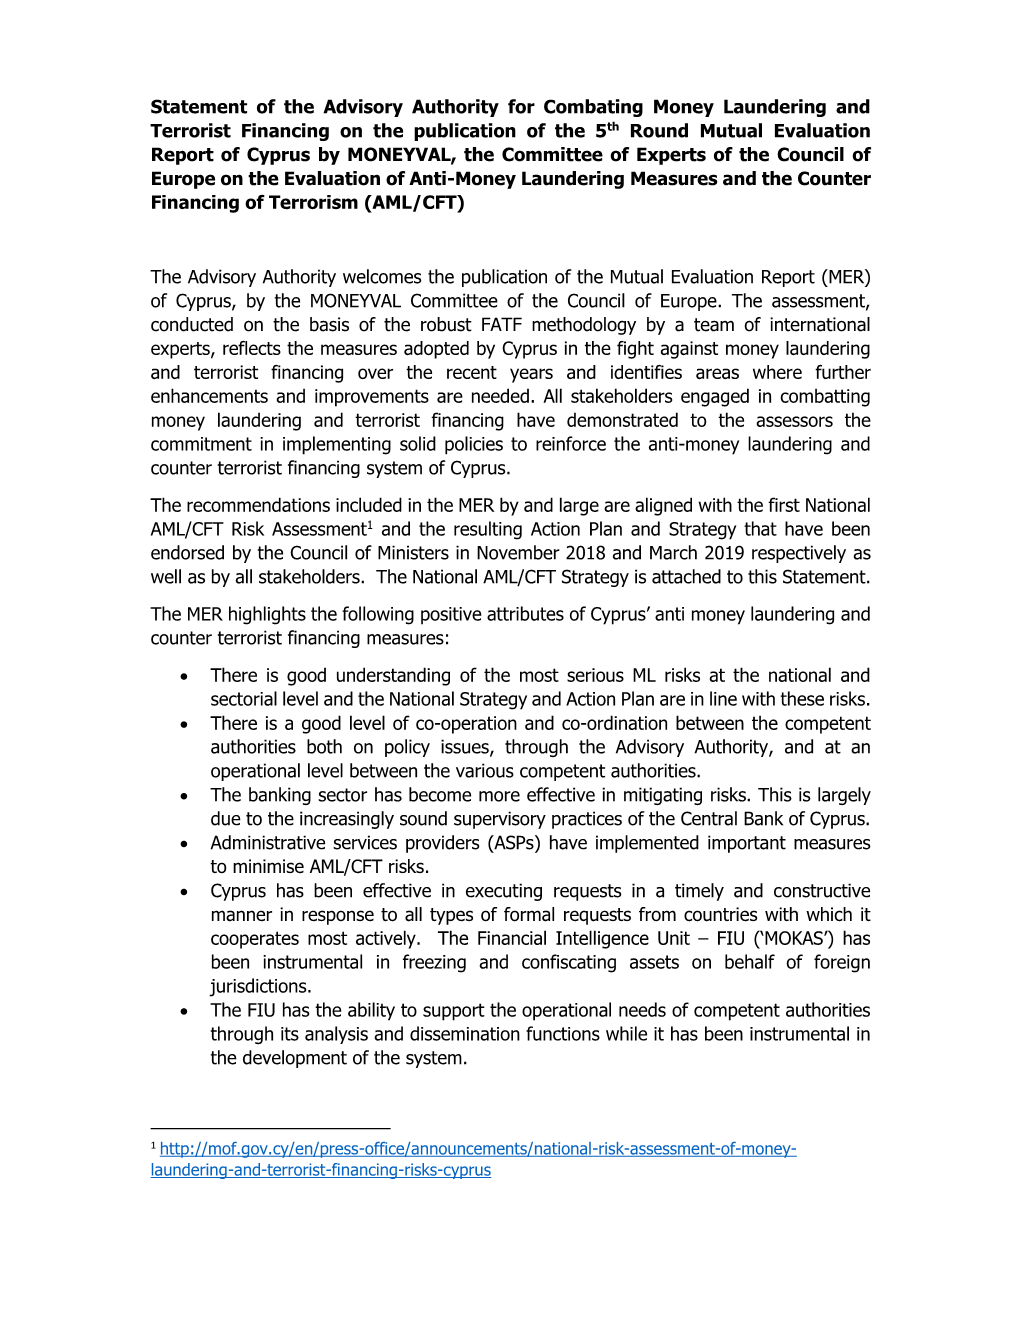 Statement of the Advisory Authority for Combating Money Laundering And